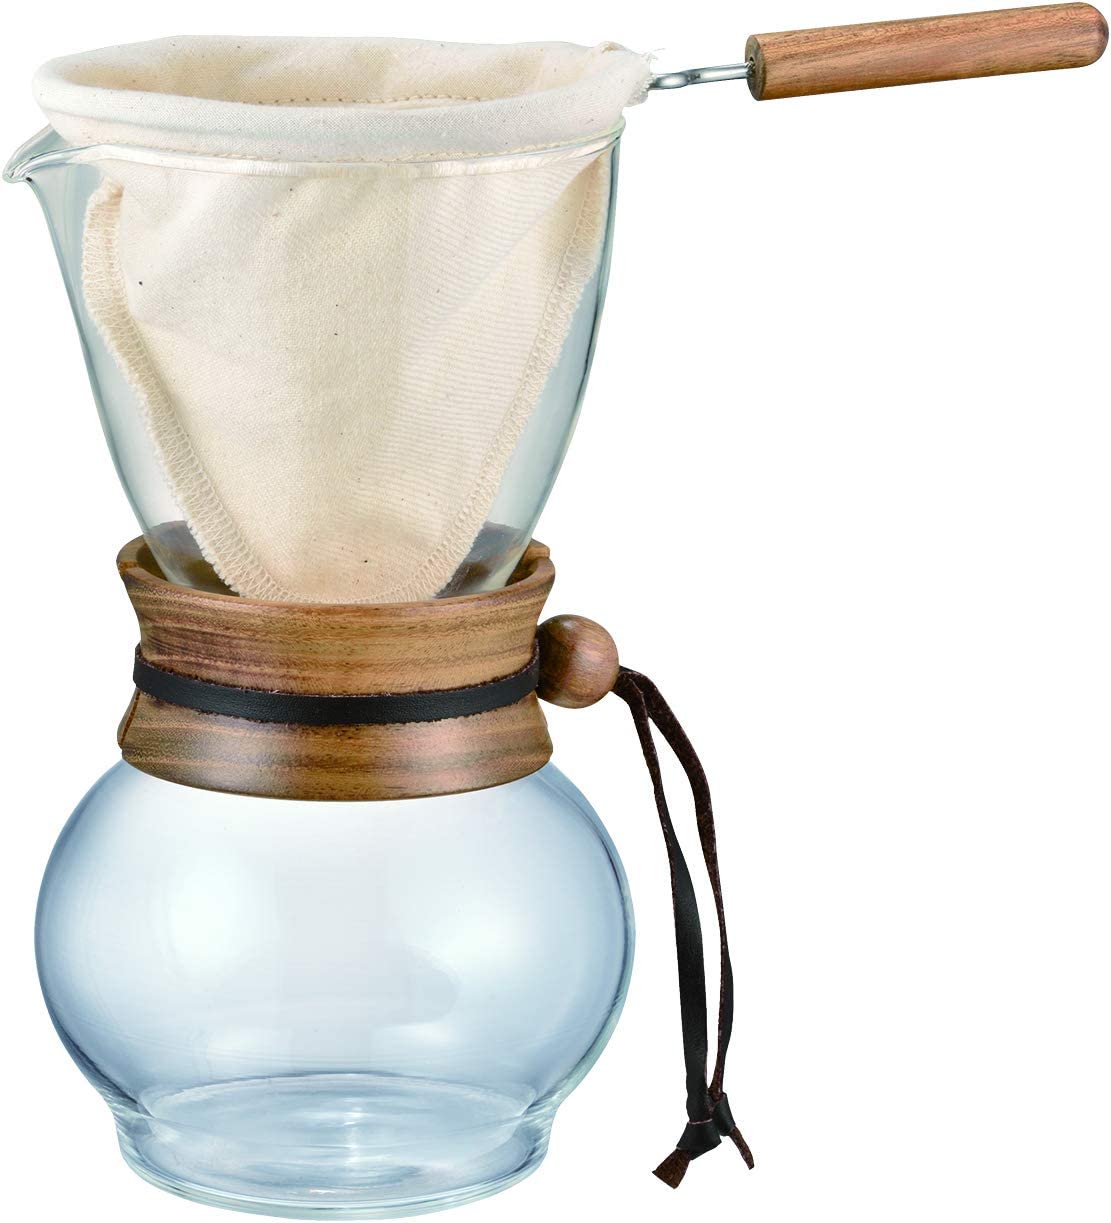 Hario 480ml Heatproof Glass and Wood Drip Pot Woodneck Pourover Coffee Maker, Pack of 1, Clear